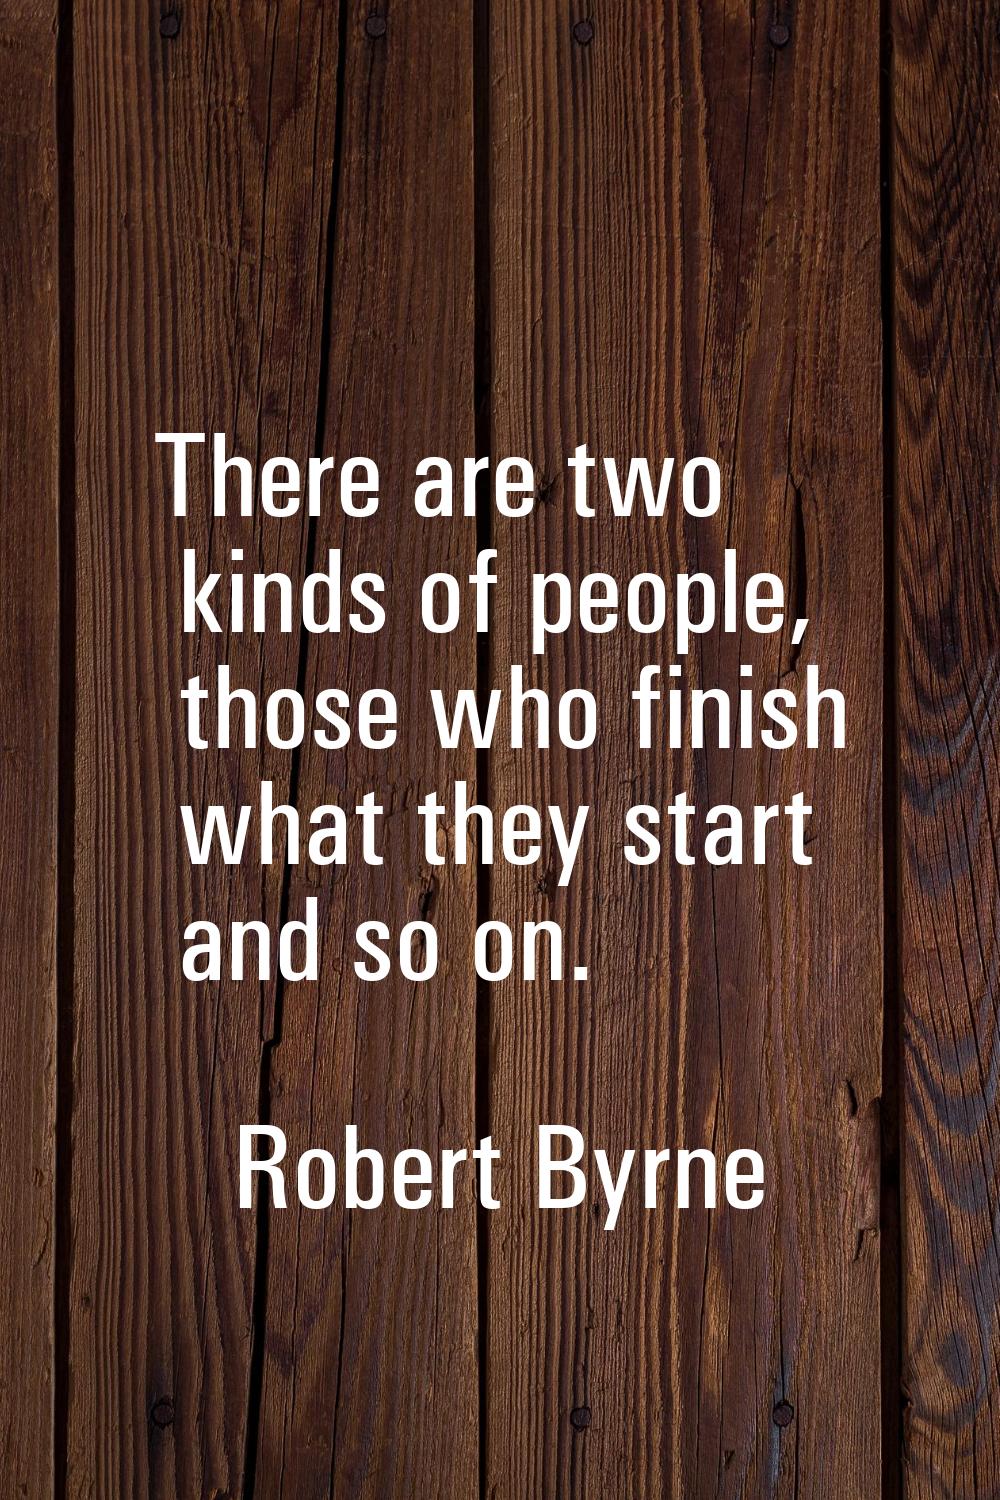 There are two kinds of people, those who finish what they start and so on.